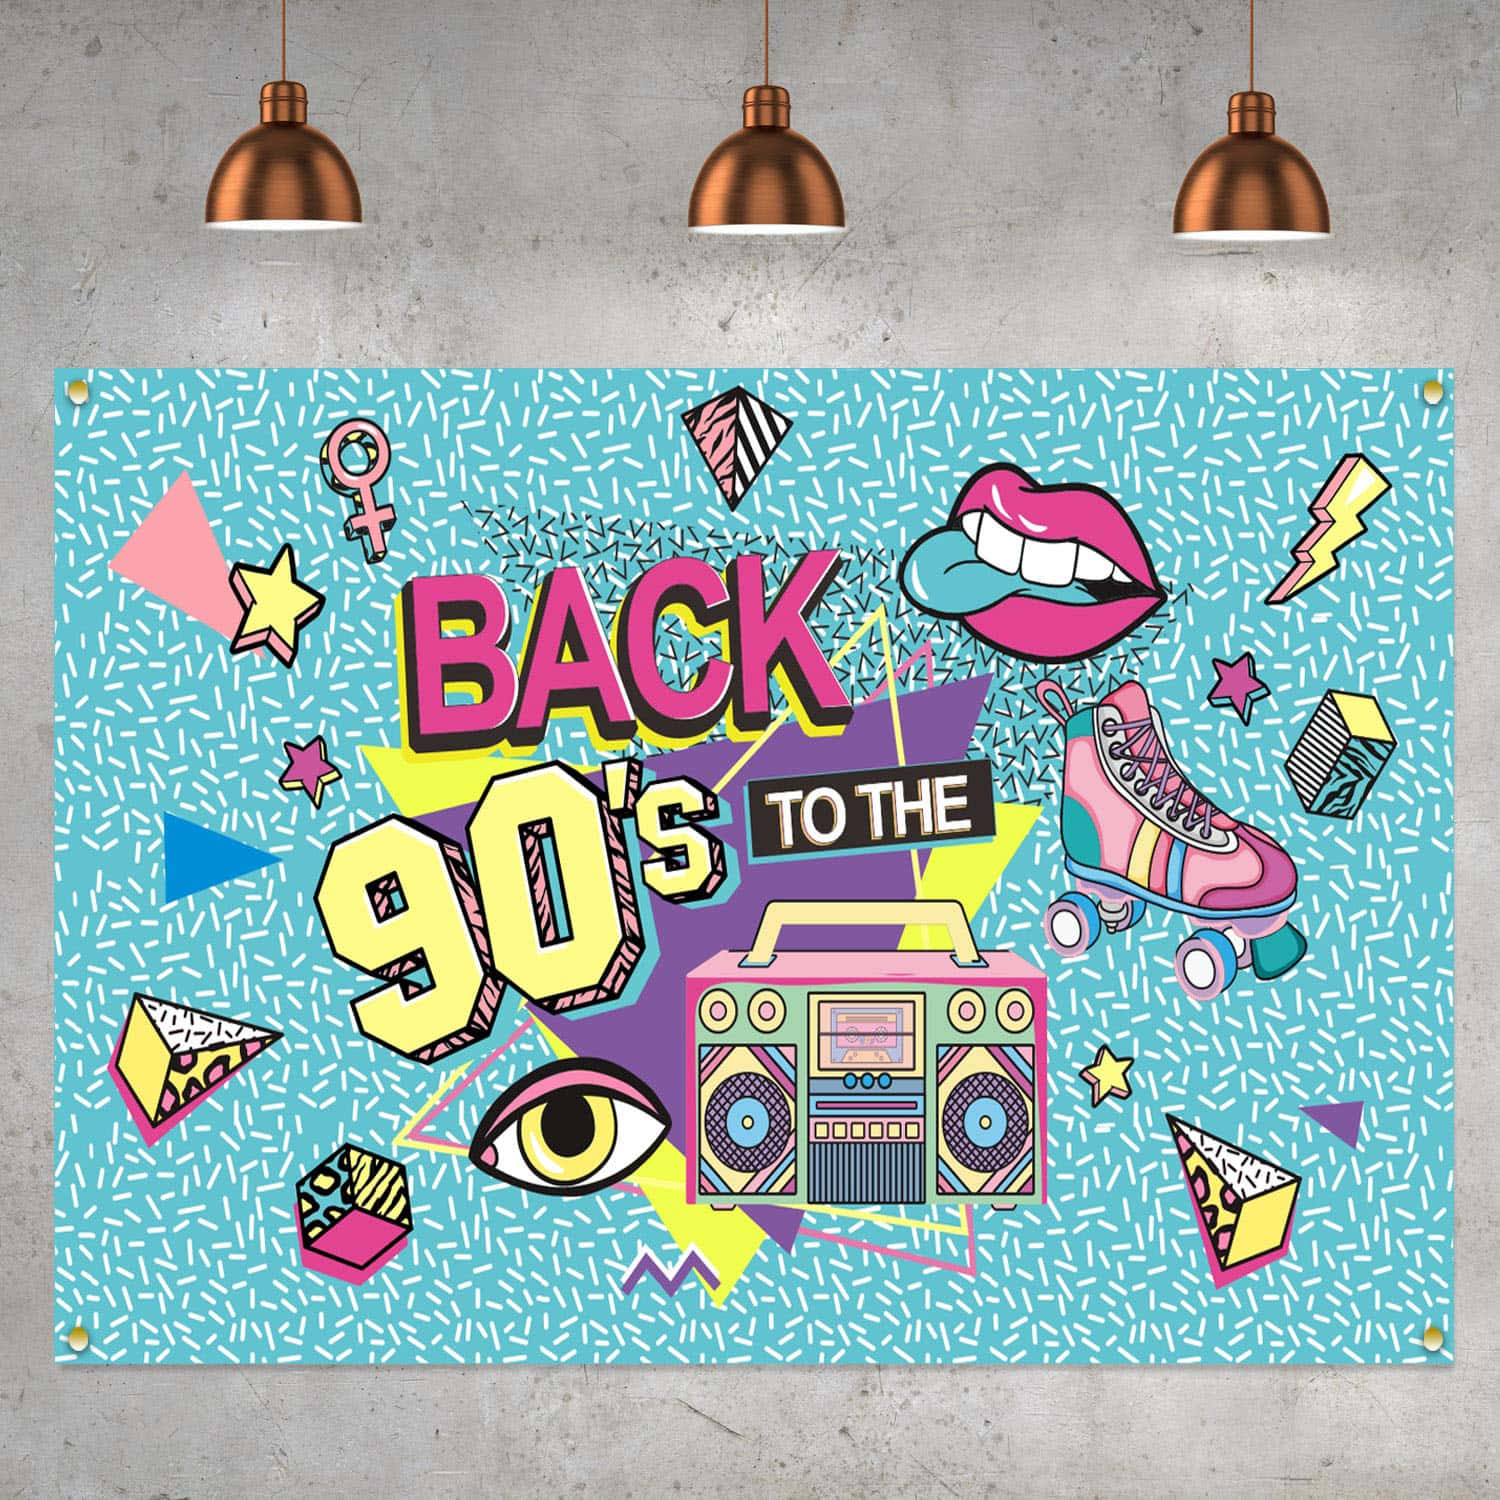 Take a trip back to the 90s with this retro-inspired theme